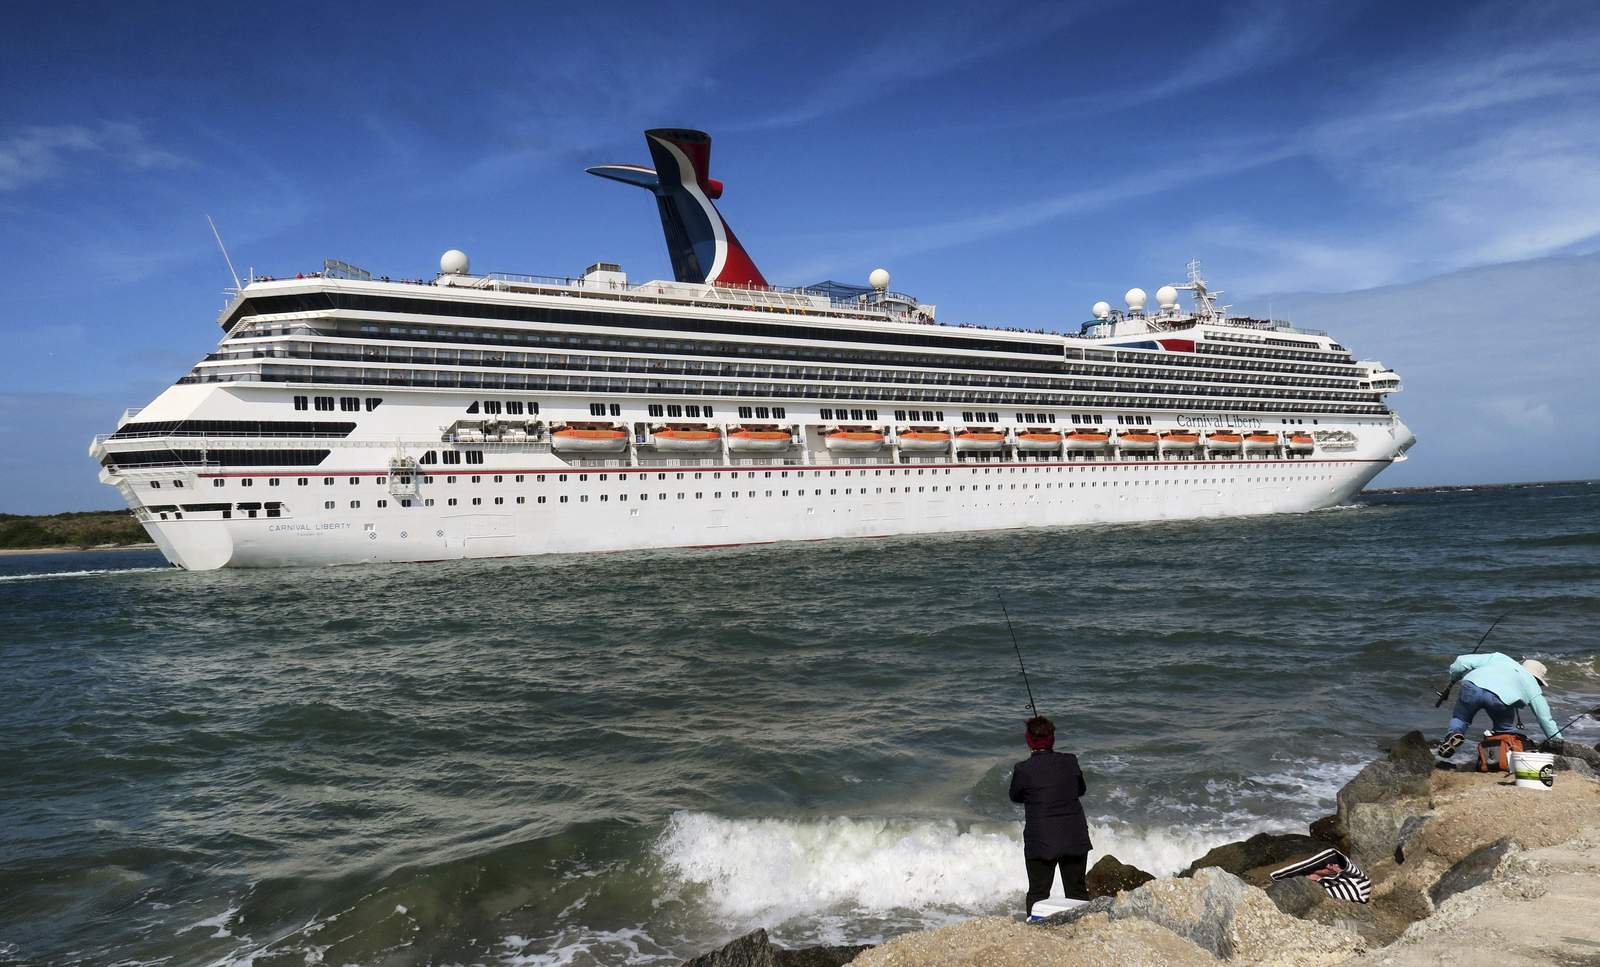 Carnival says 2022 cruise bookings are strong despite expected loss this year